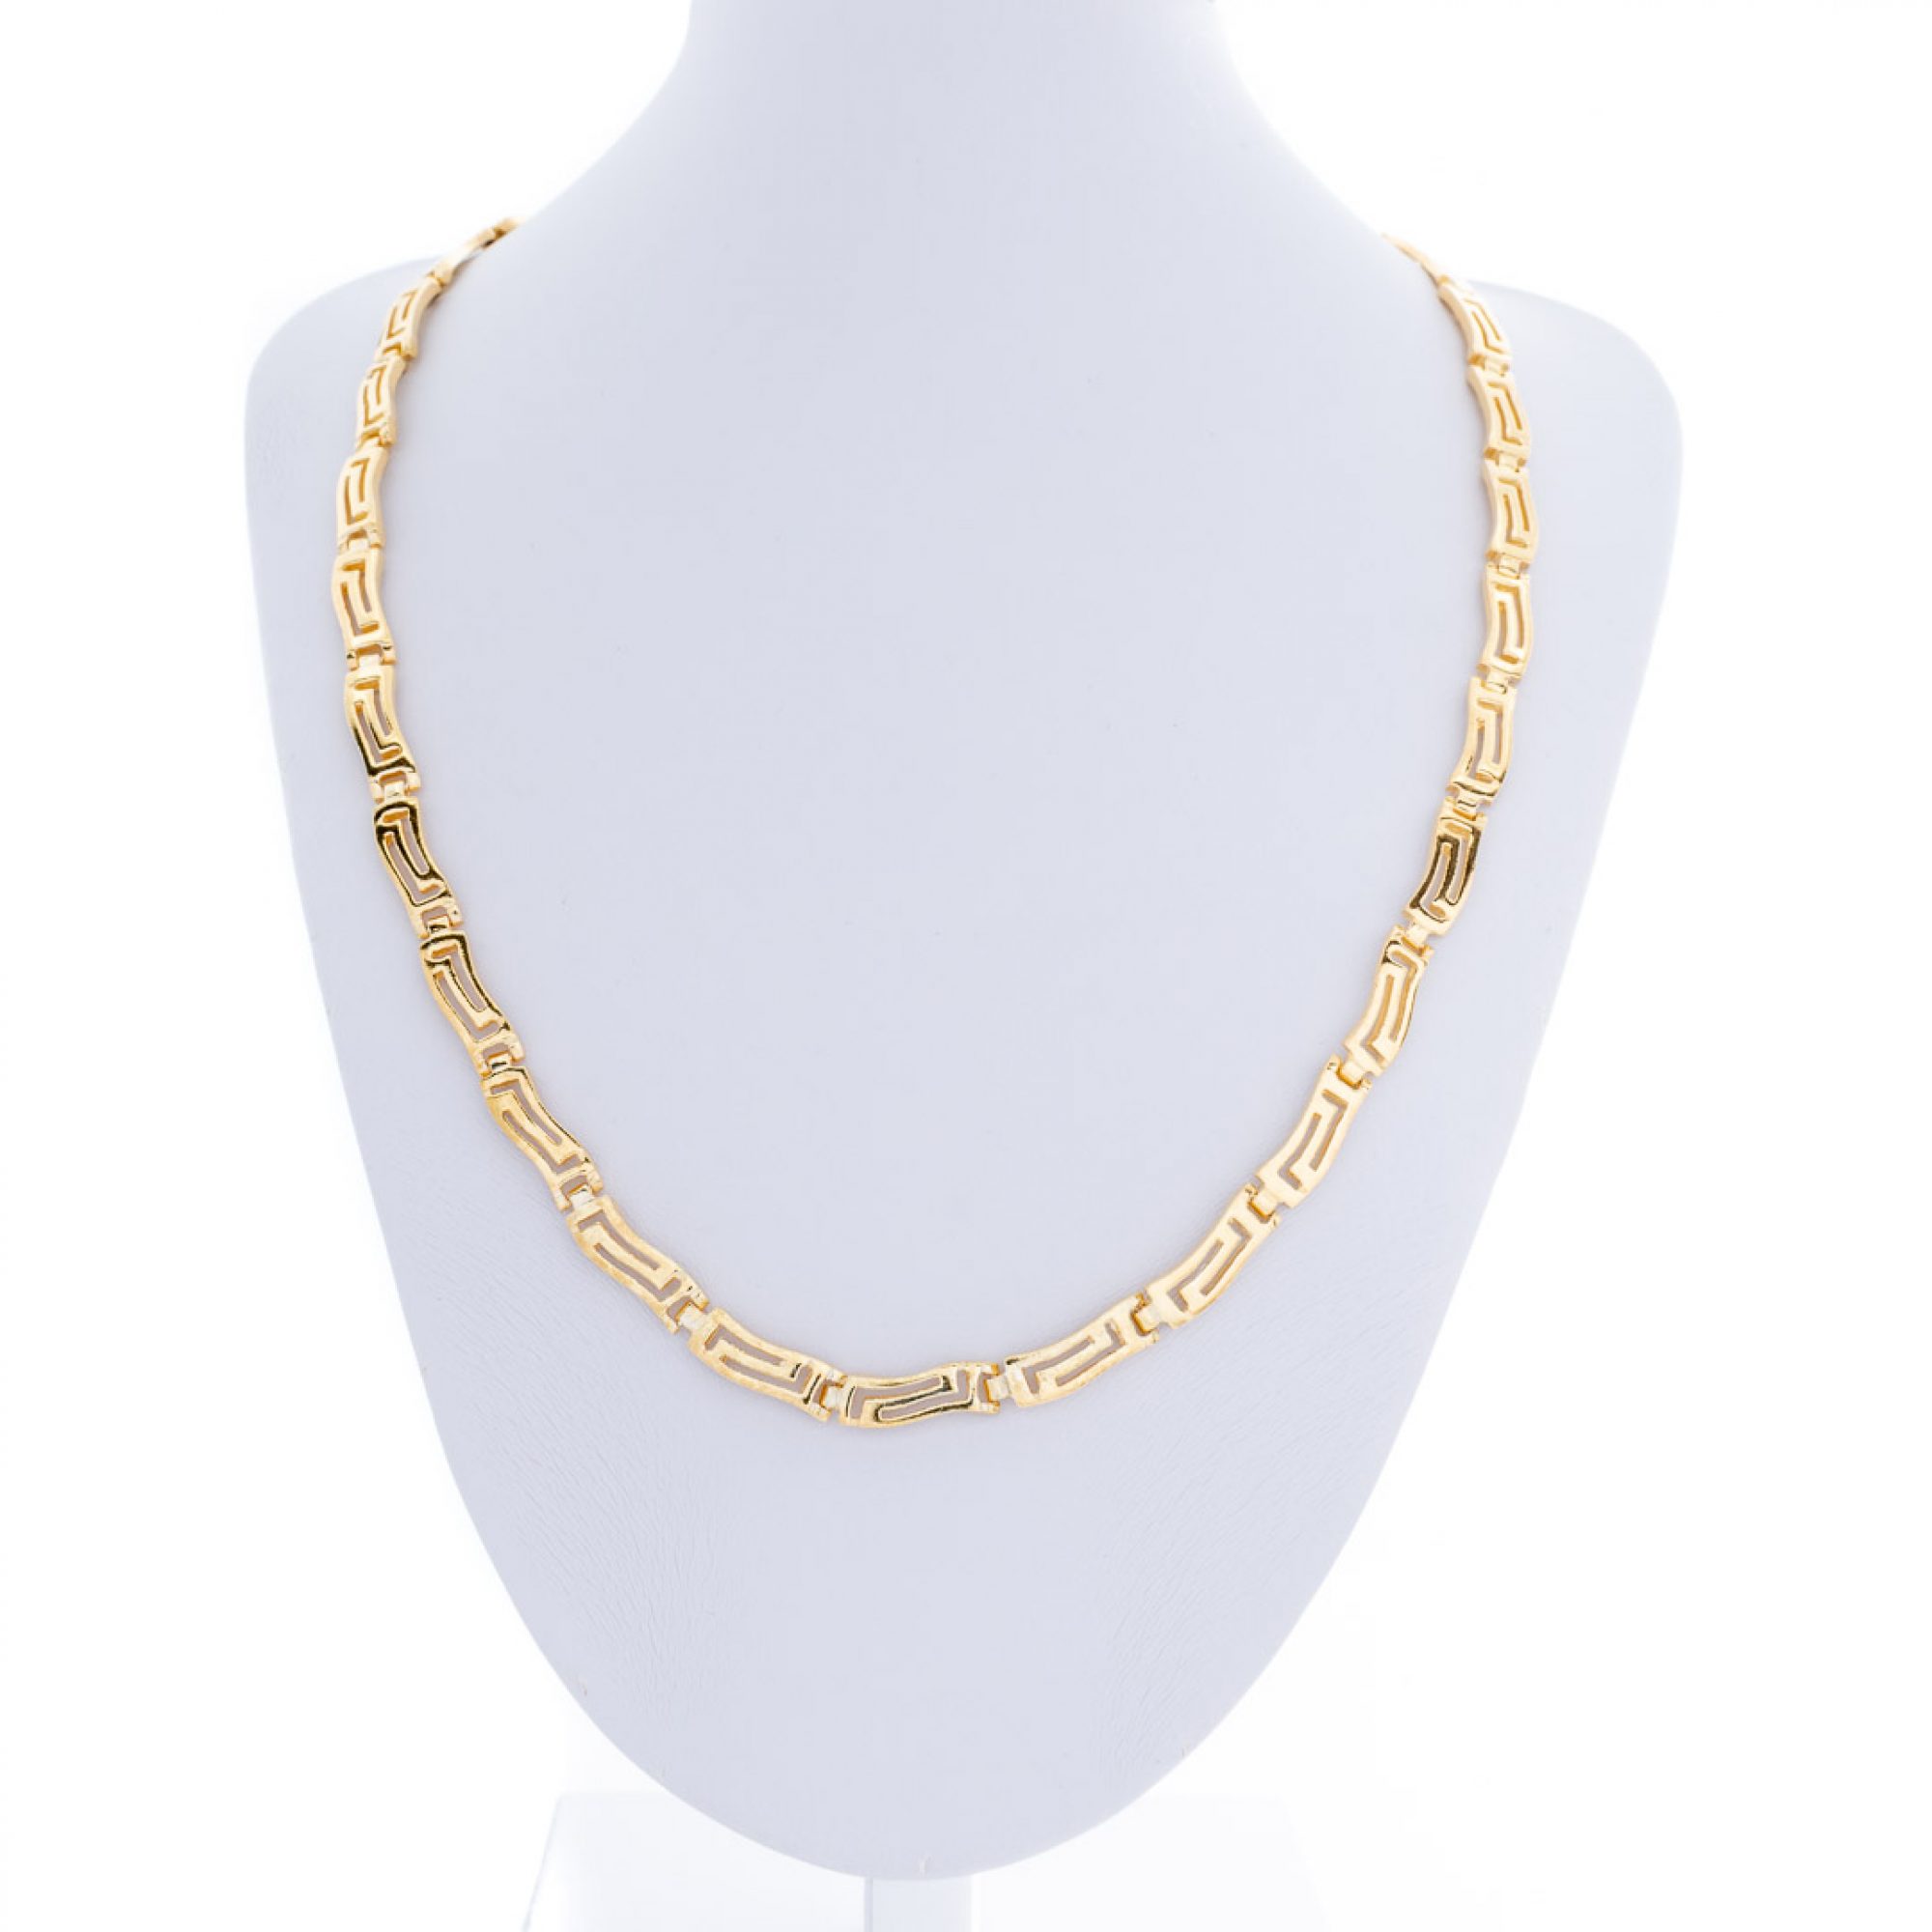 Gold plated meander necklace